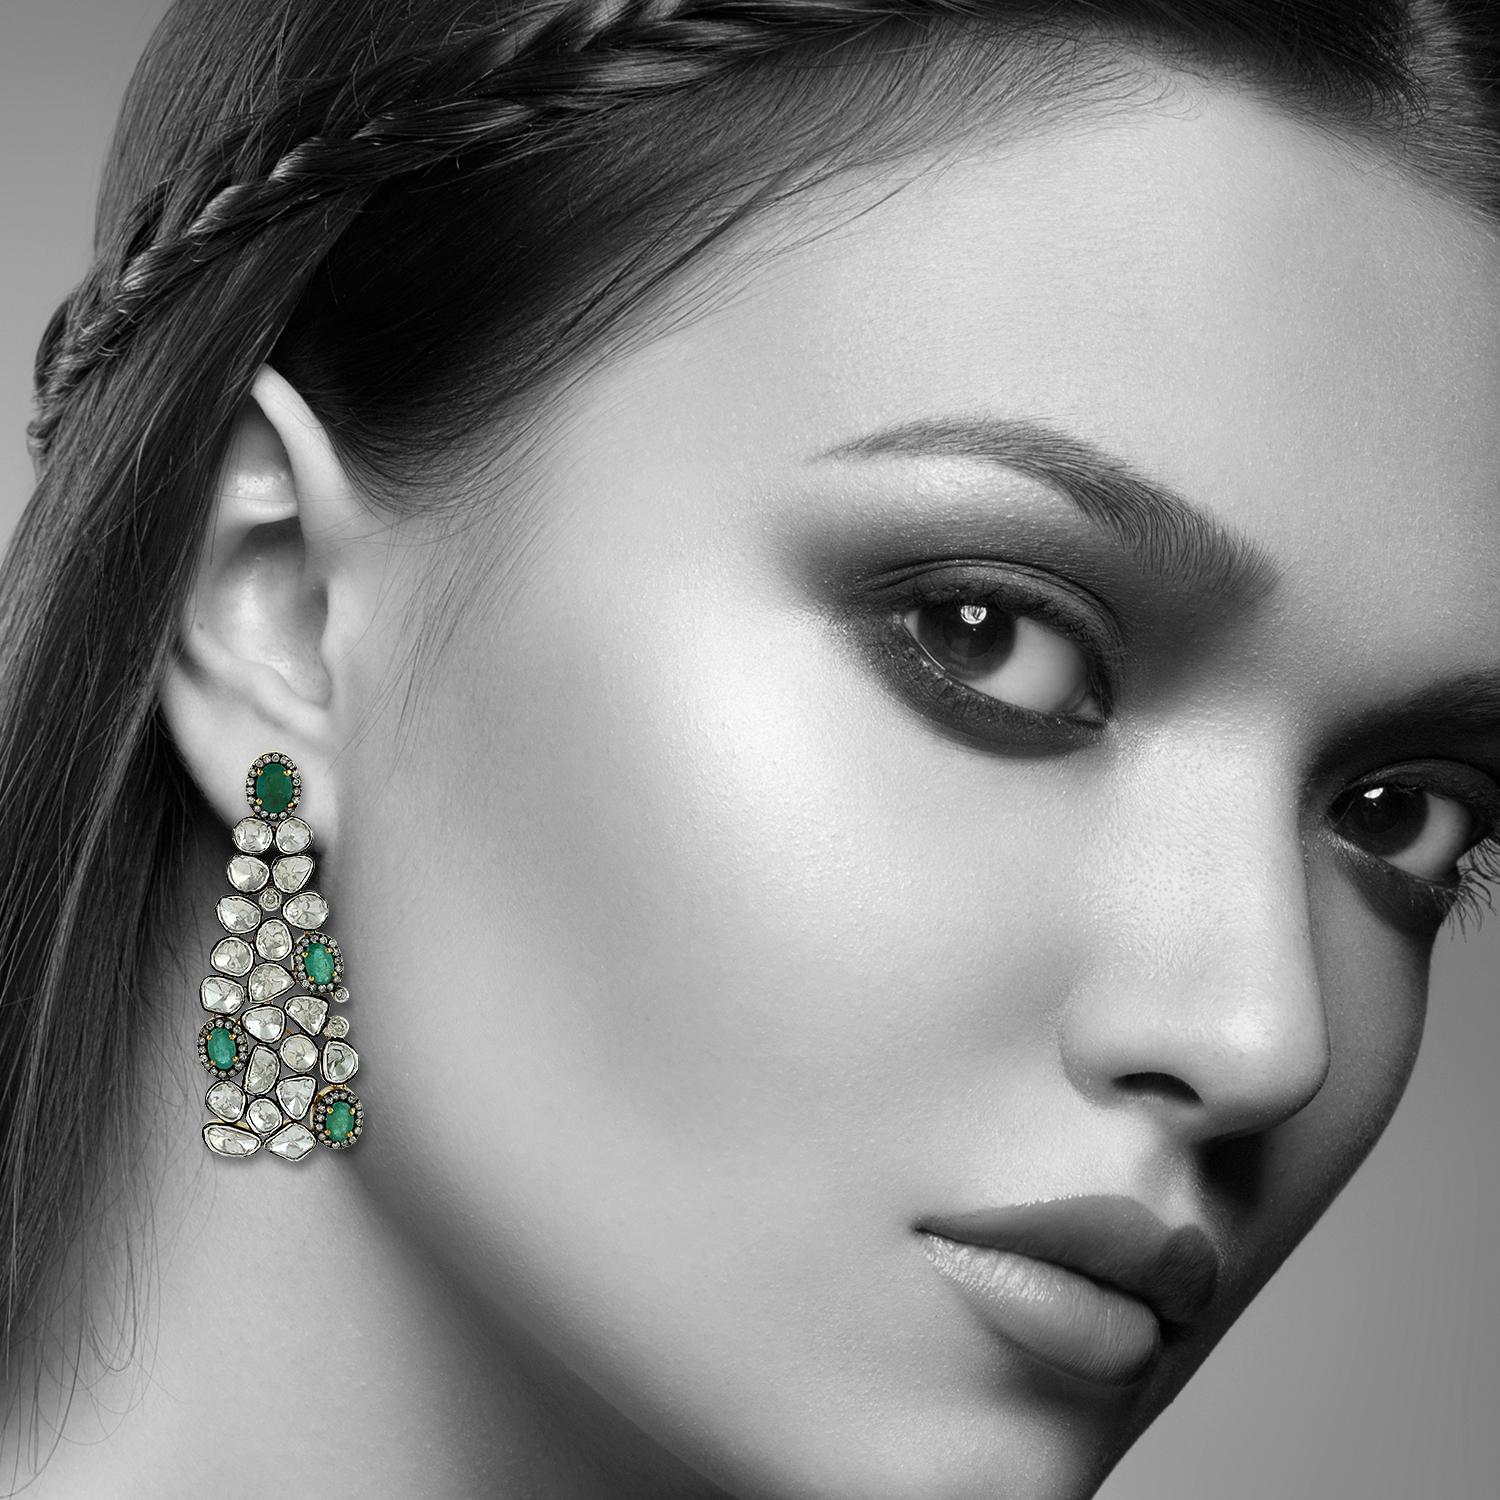 These stunning earrings are handcrafted in 18-karat gold & sterling silver.  They have a chandelier-style silhouette that's encrusted with 4.0 carats emeralds and 12.05 carats of rose cut diamonds with blackened finish.

FOLLOW  MEGHNA JEWELS